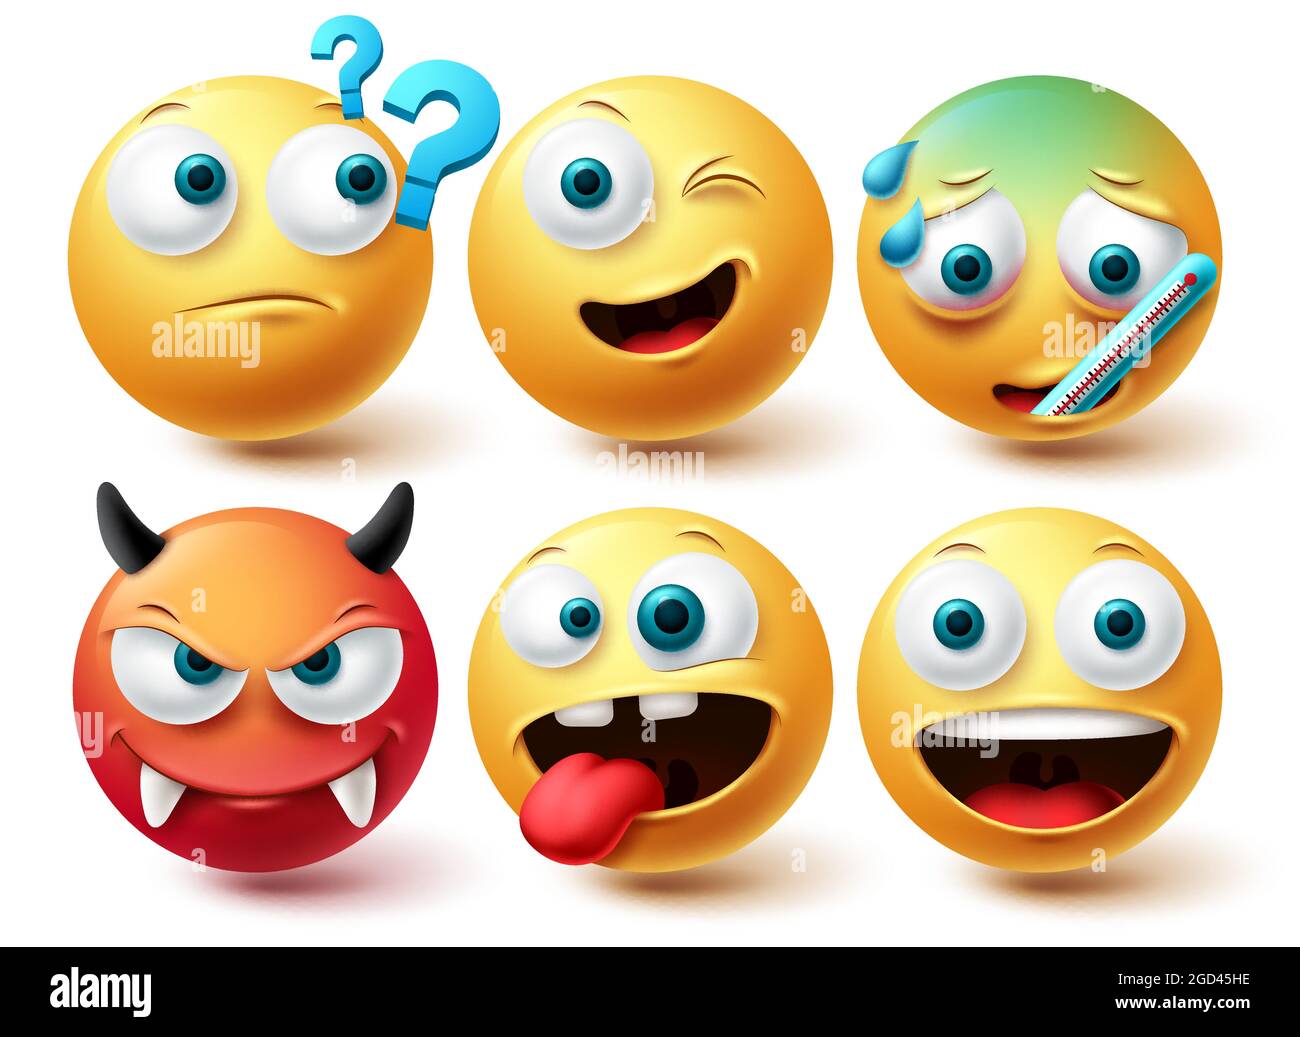 Smiley emoji vector set. Smileys emoticon happy, angry and silent yellow and red icon collection isolated in white background for graphic design Stock Vector